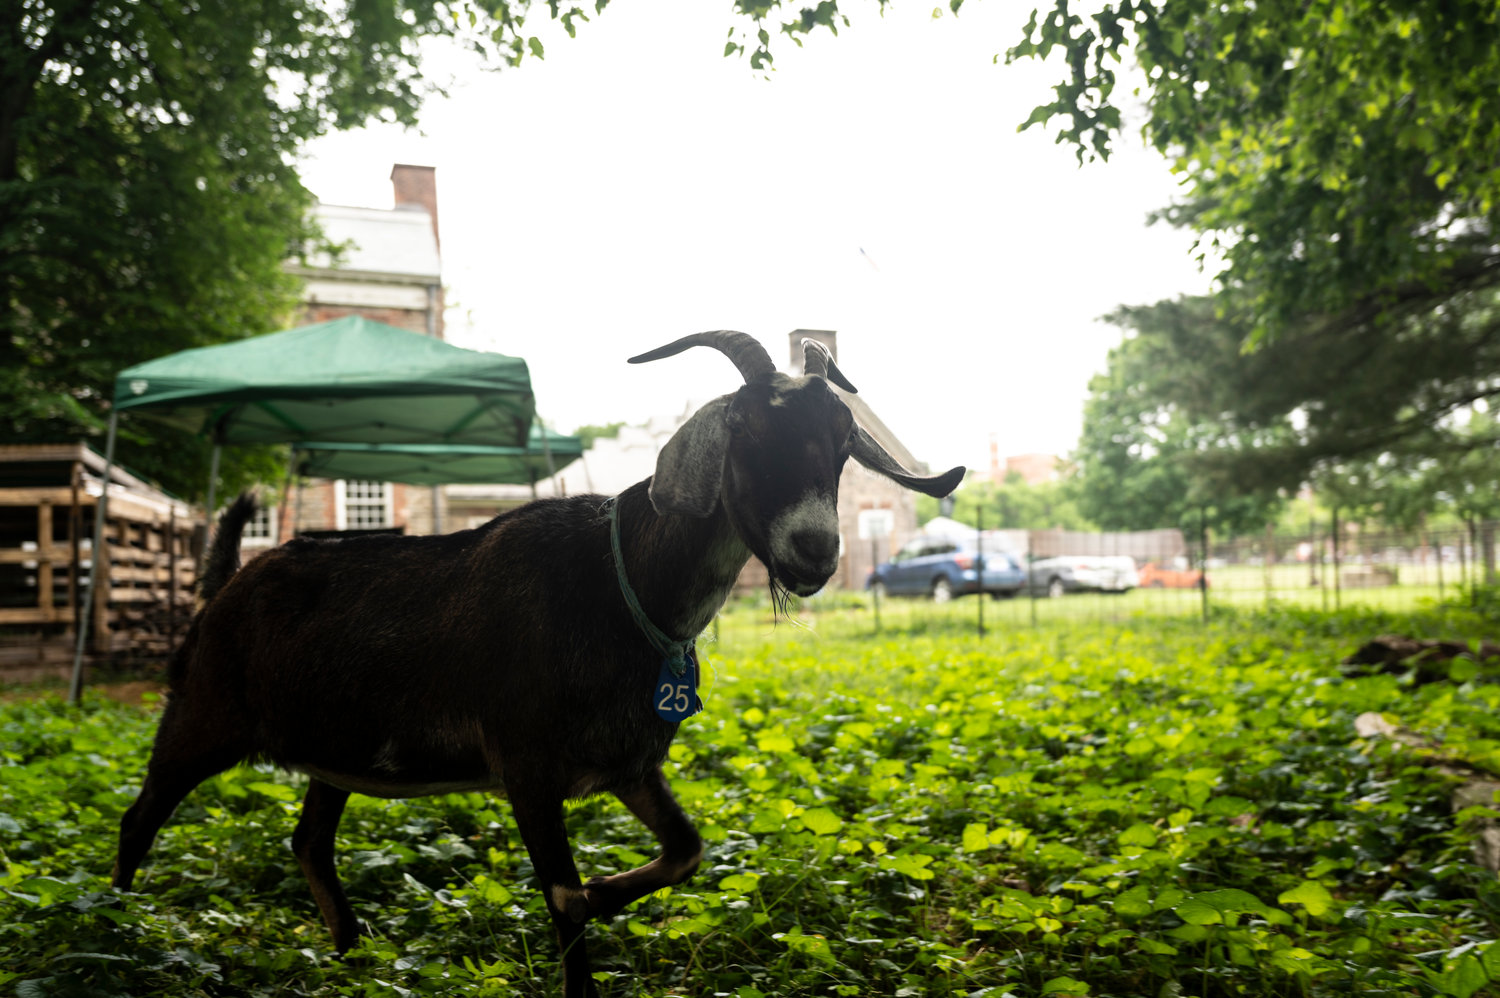 Juliet prances in the pasture where she wolfs down invasive plants like poison ivy and burdock. Poison ivy doesn’t harm goats, so Juliet simply sees it as another type of fresh, leafy green to feast on.